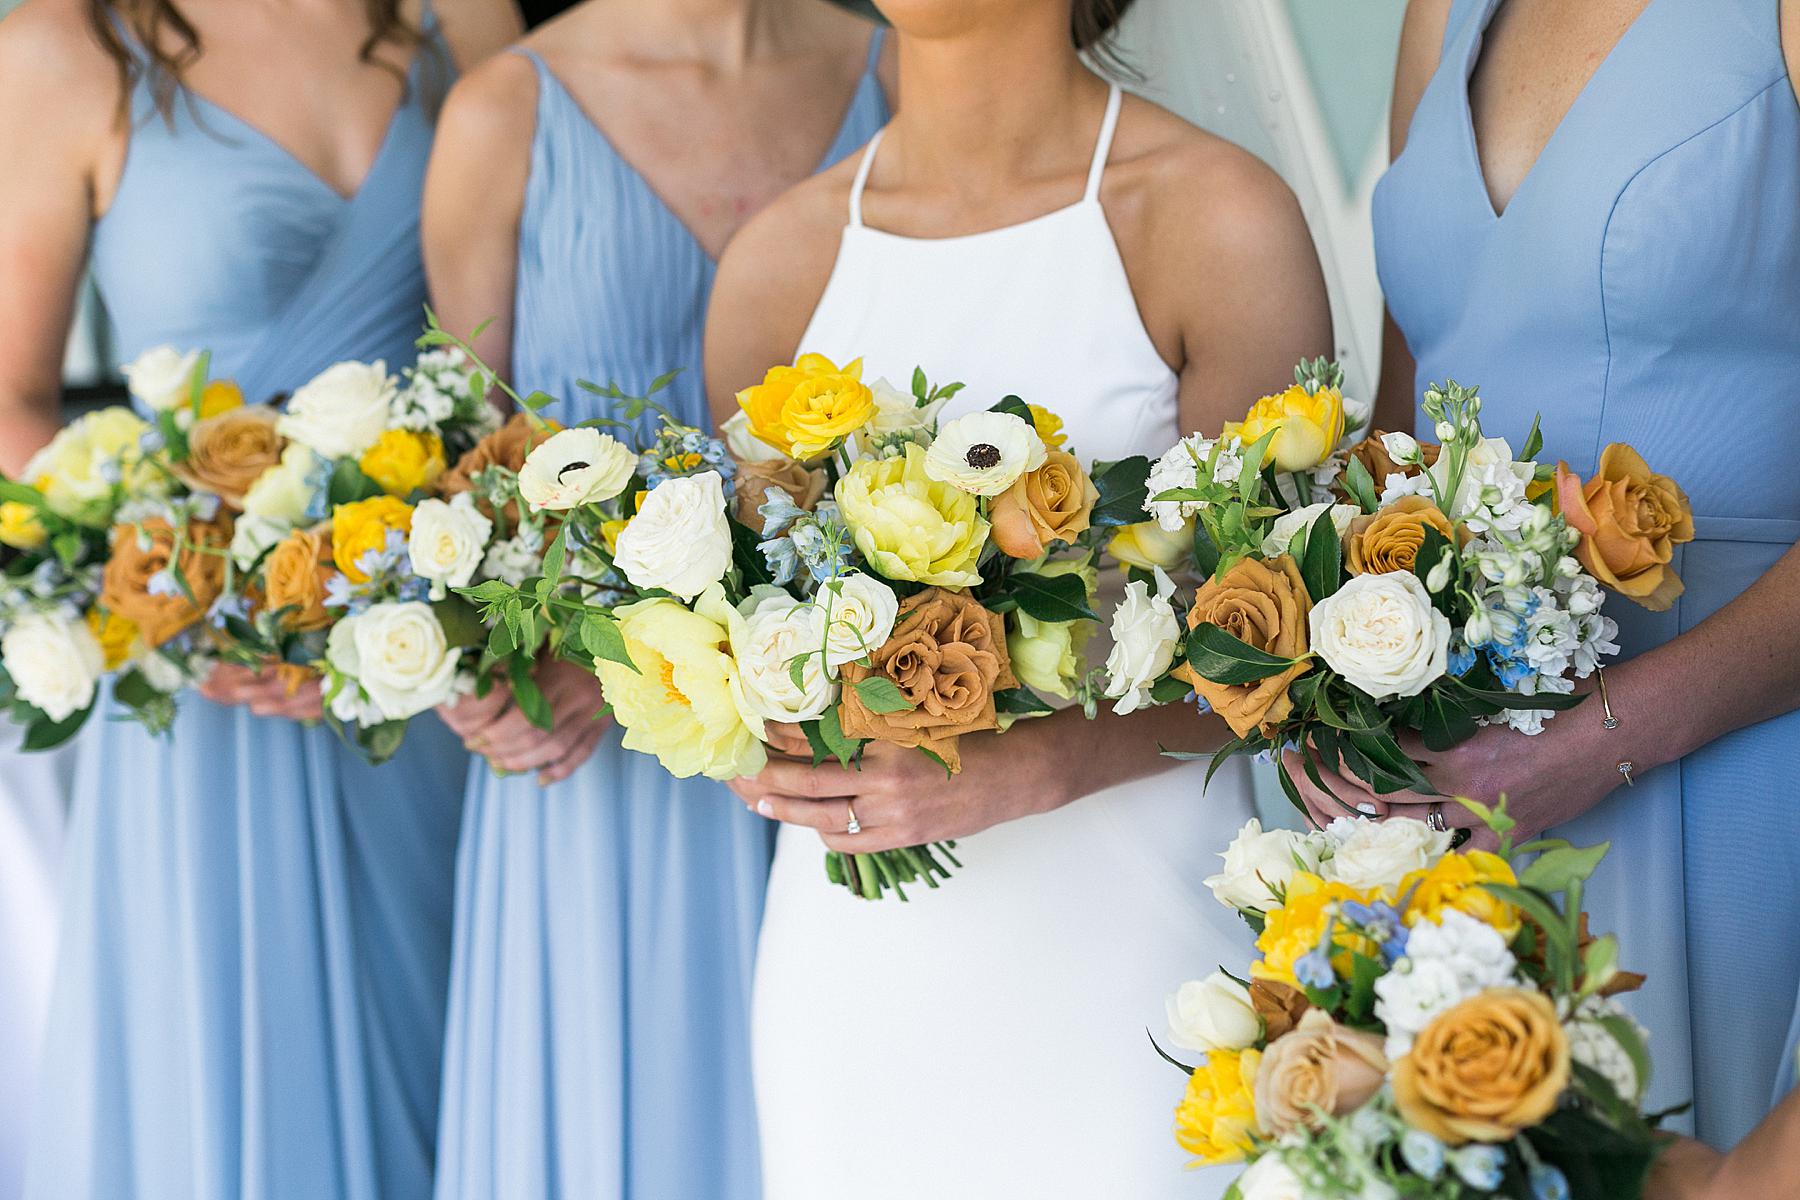 bride and bridesmaid bouquets in yellow, white, and orange, wearing blue dresses